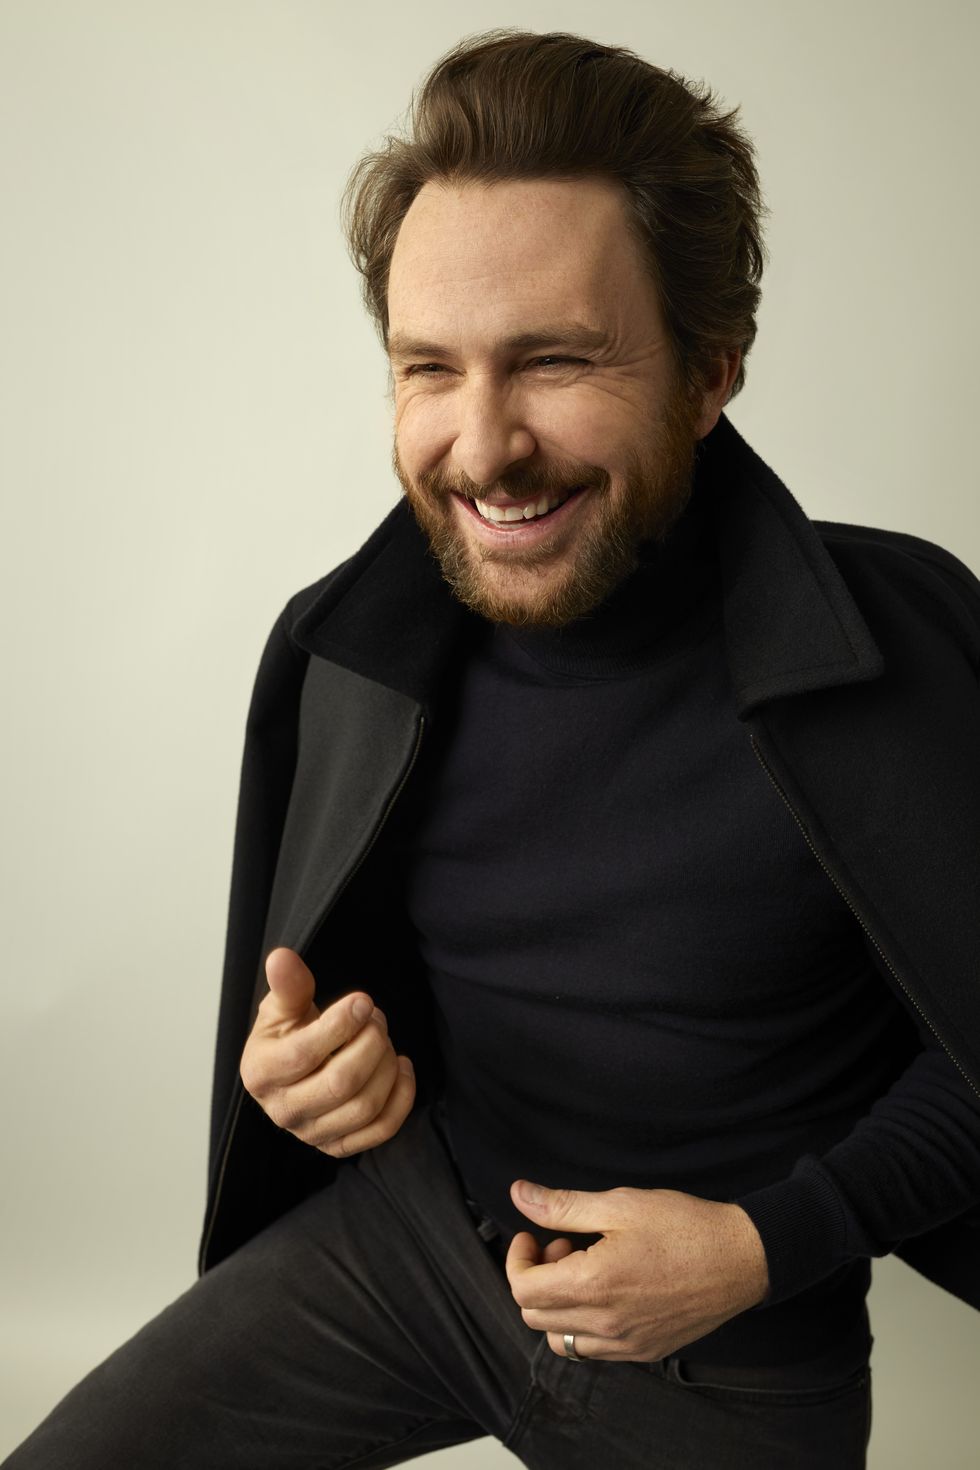 Charlie Day Wins Our Hearts Over With I Want You Back - Exclusive